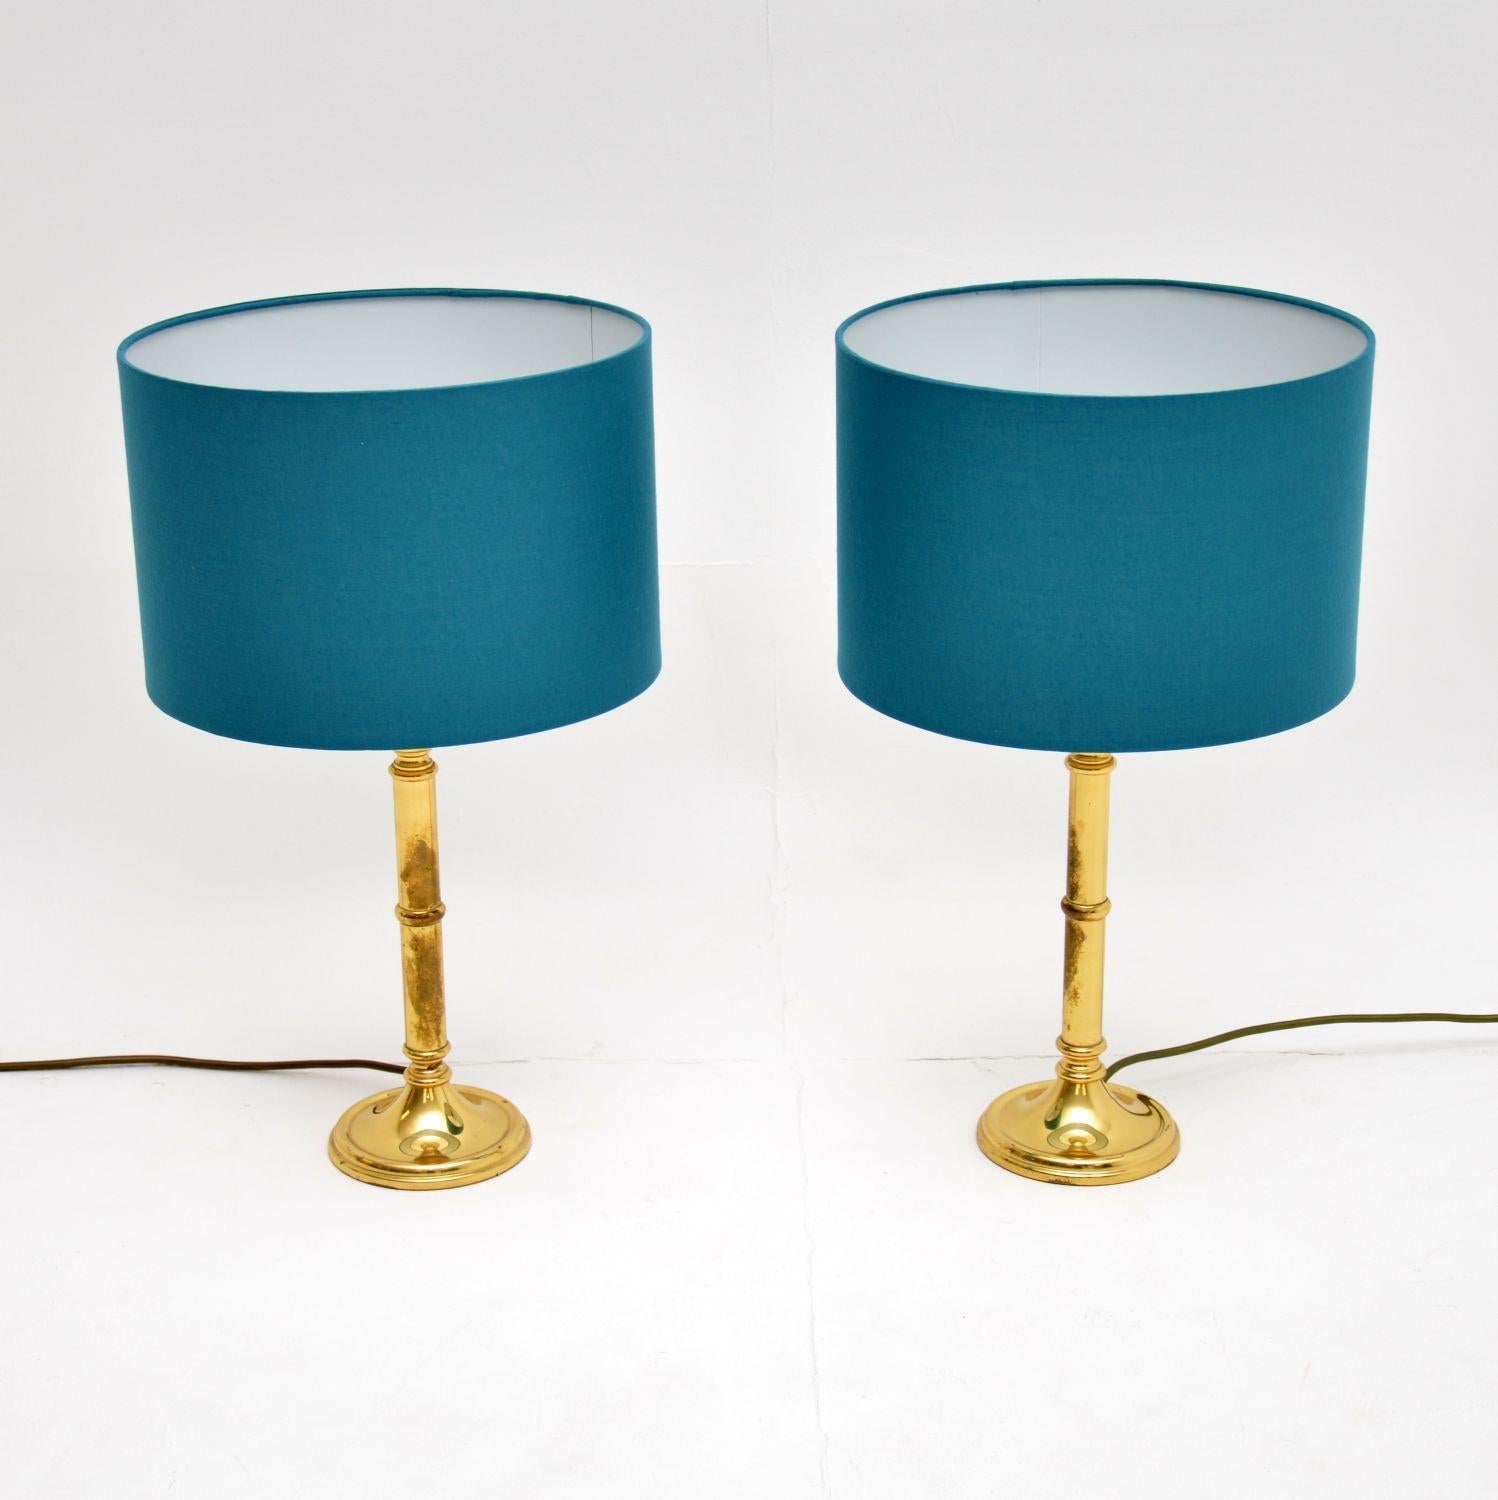 A stunning pair of vintage brass table lamps, dating from circa 1970s-1980s. These are really high quality and are in great vintage condition. They have some light wear and tarnishing, overall the patina is lovely. They are in good working order,